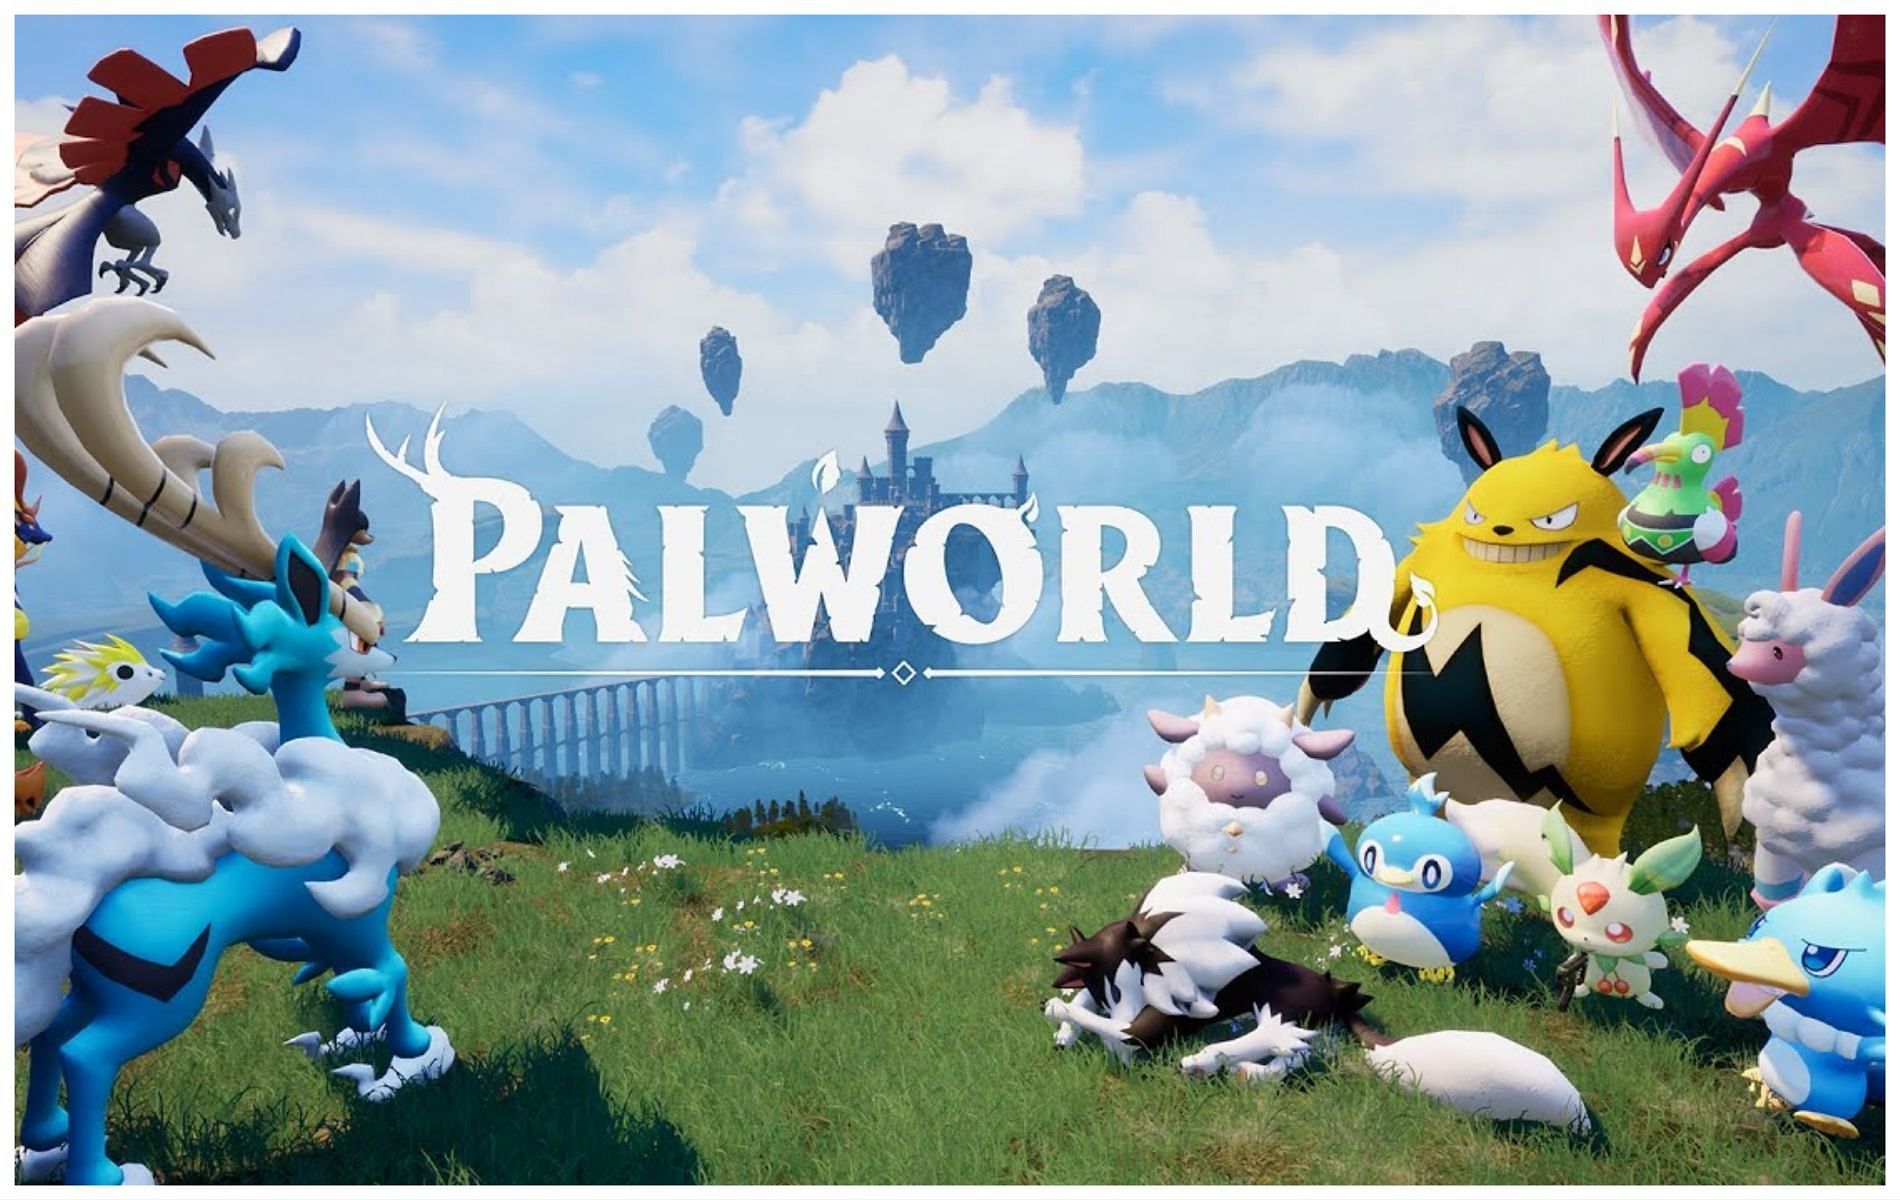 Official cover photo of Palworld.